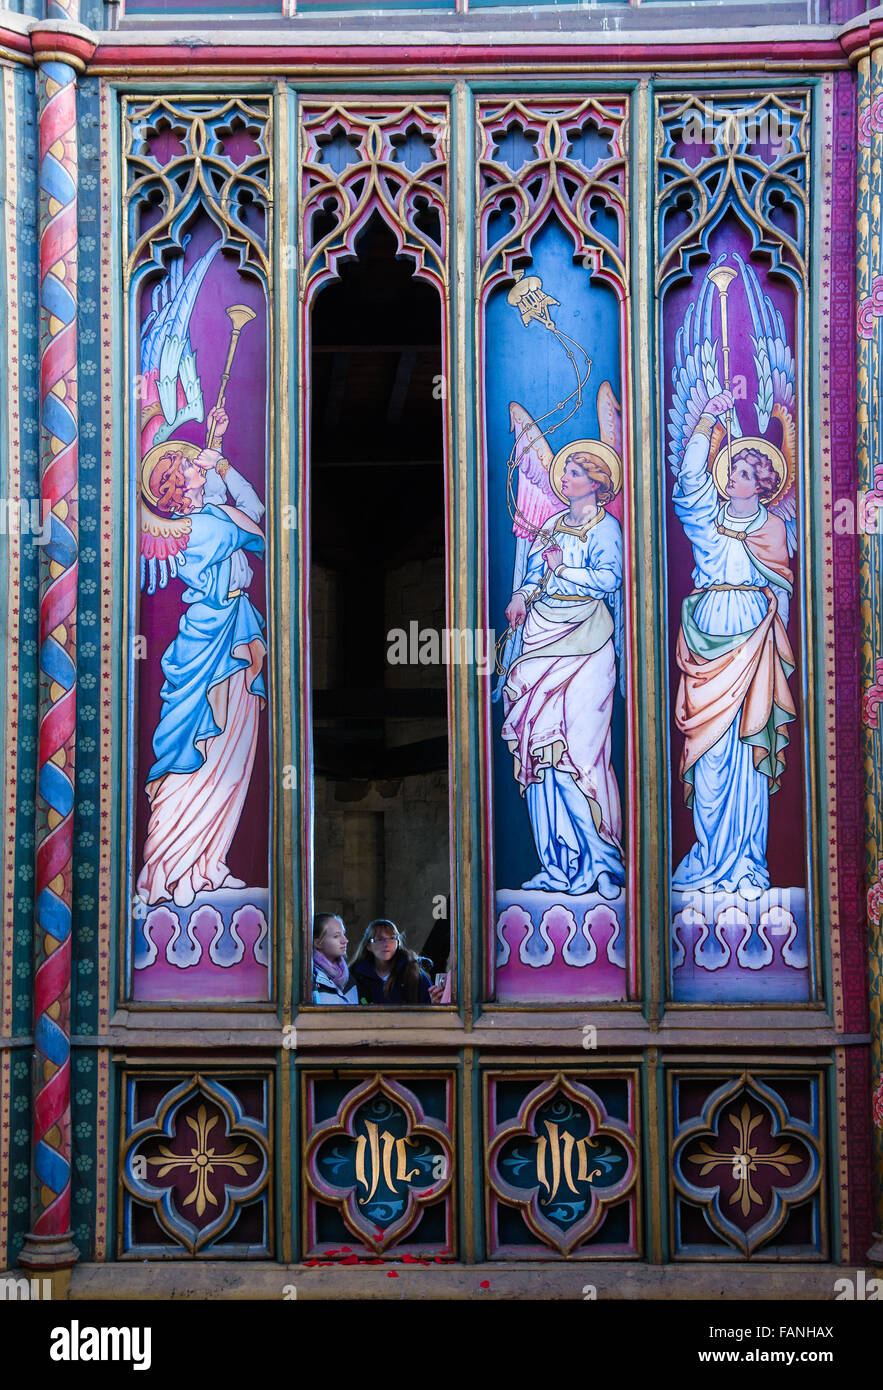 Victorian panels with painted angels on the Octagon tower at Ely cathedral, England. Stock Photo